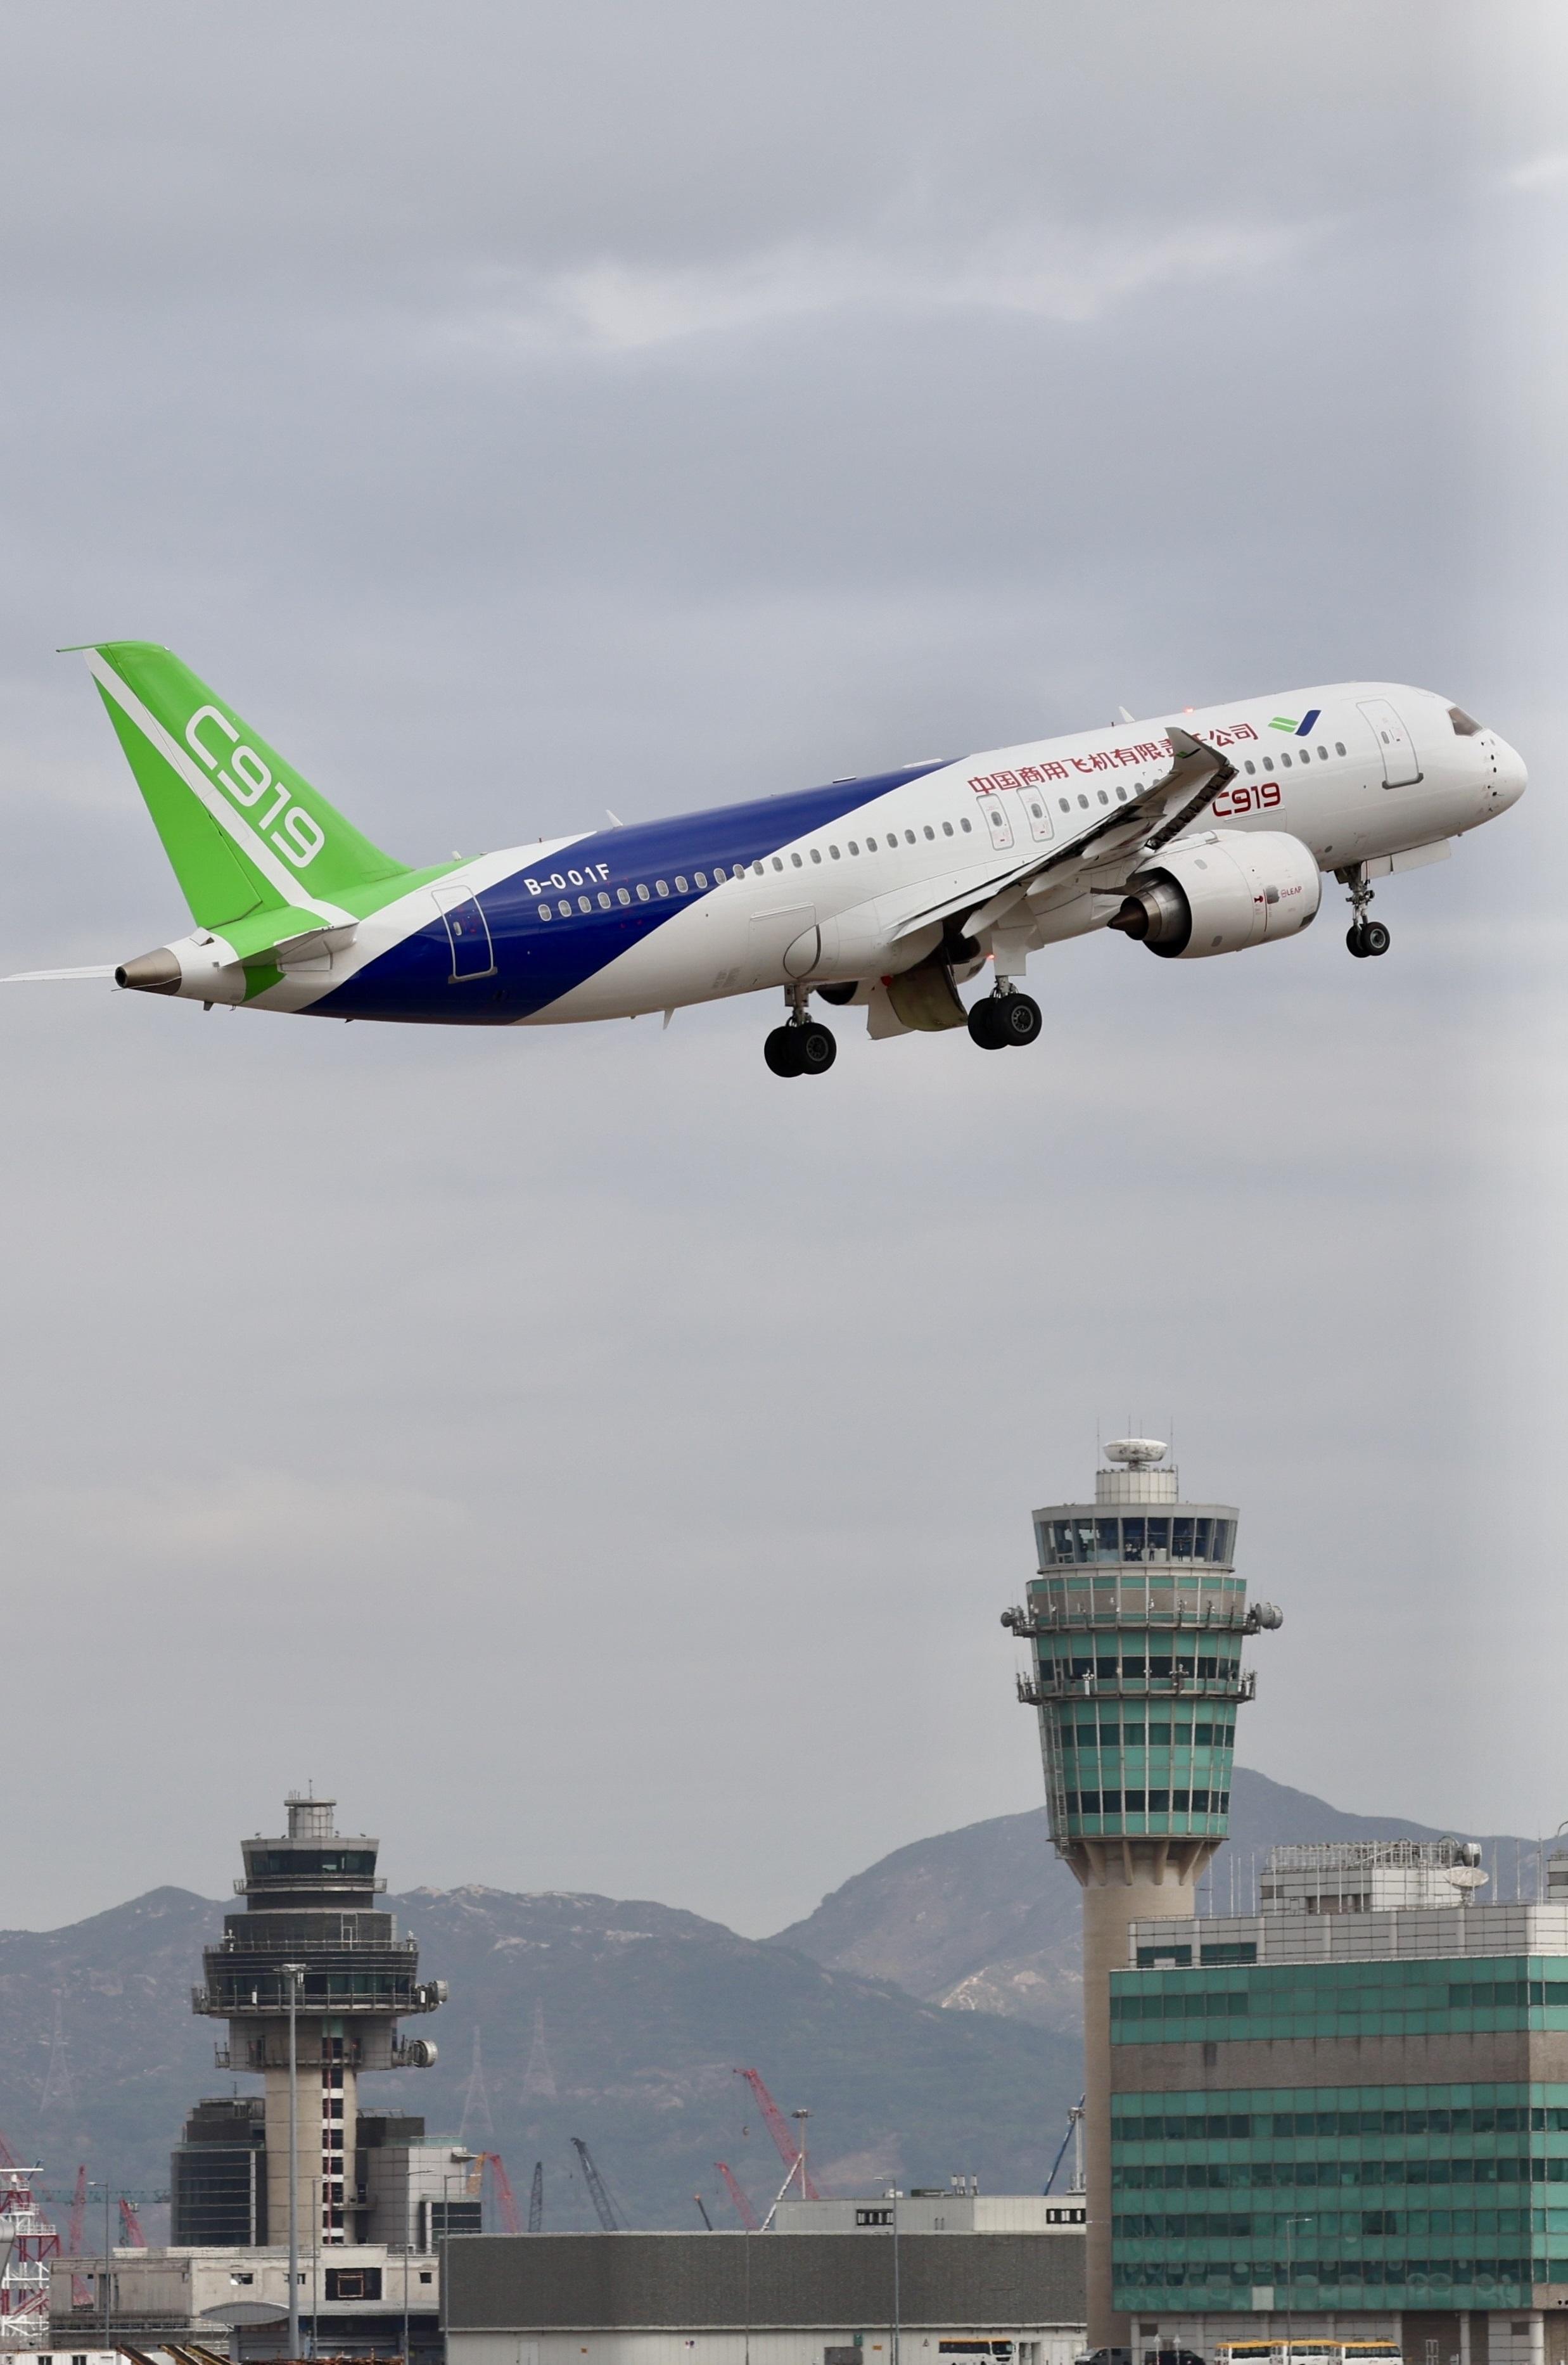 The flight demonstration of home-grown aircraft C919 concluded successfully this morning (December 16). Photo shows the C919 aircraft taking off from the Hong Kong International Airport.

